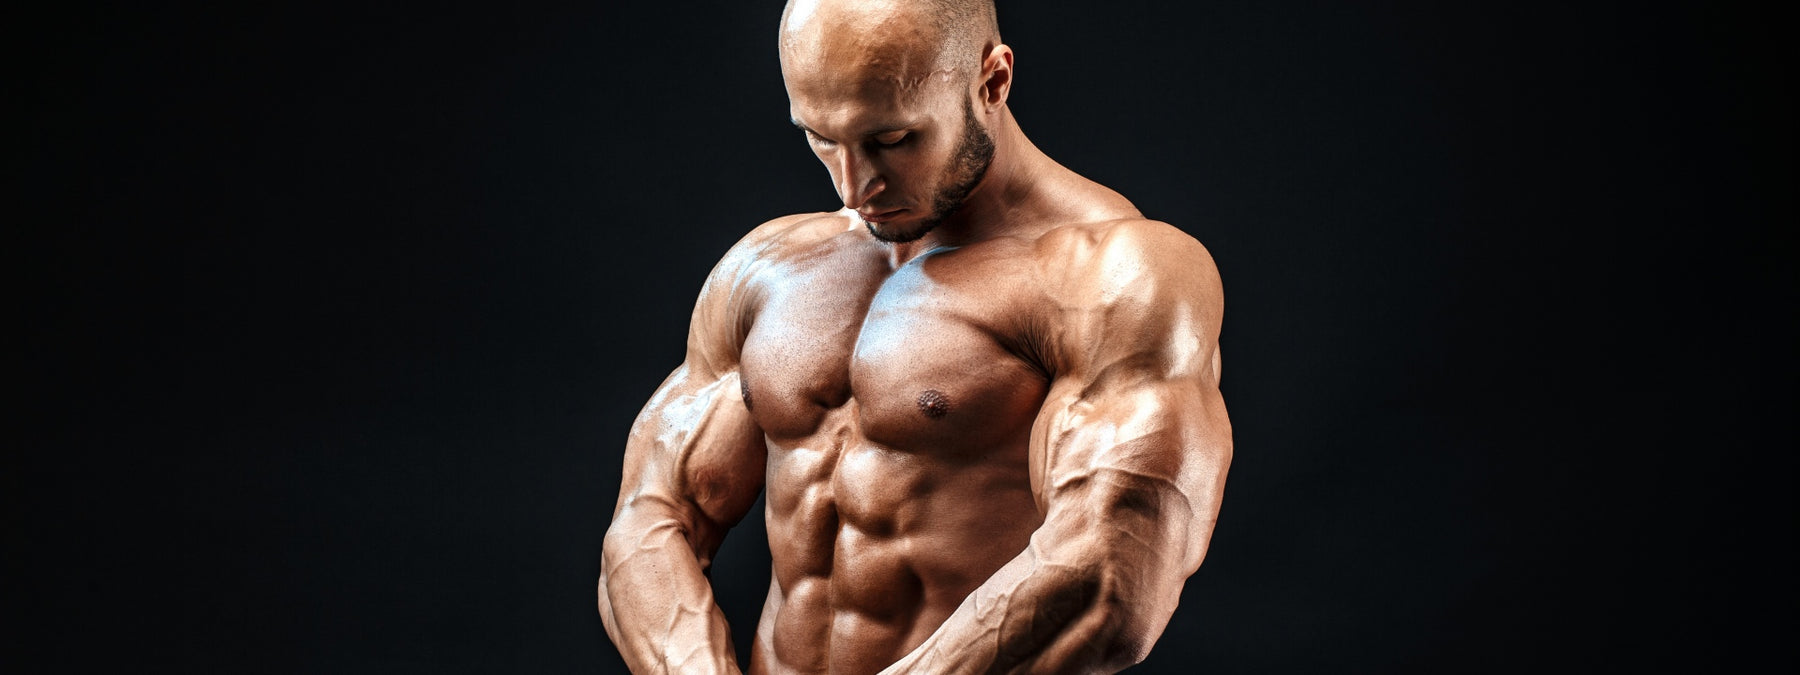 5 Underrated Exercises for Building a Thick, Explosive Chest